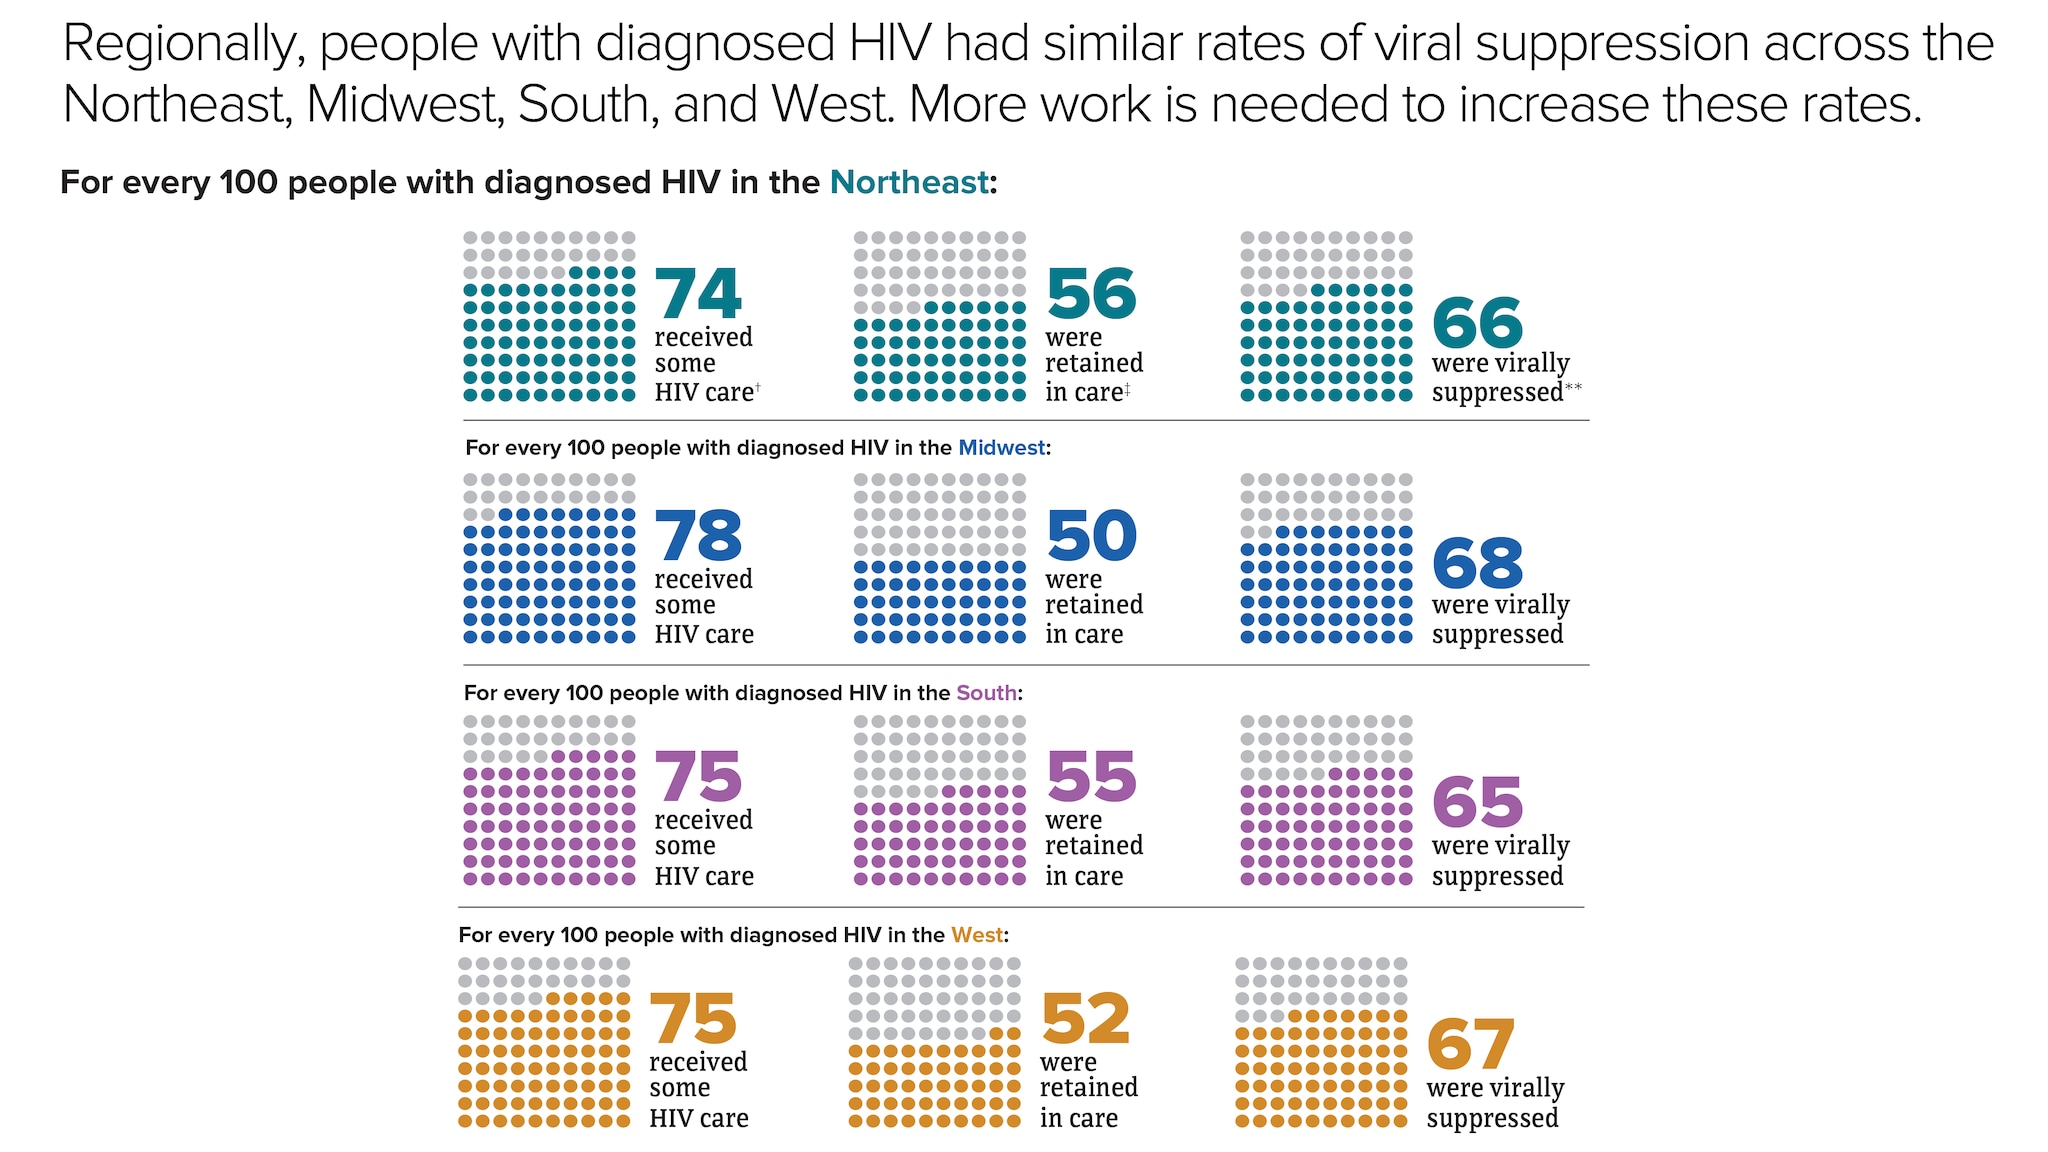 Regionally, people with diagnosed HIV had similar rates of viral suppression across the Northeast, Midwest, South, and West. More work is needed to increase these rates. For every 100 people with diagnosed HIV in the Northeast, 74 received some HIV care, 56 were retained in care, and 66 were virally suppressed. For every 100 people with diagnosed HIV in the Midwest, 78 received some HIV care, 50 were retained in care, and 68 were virally suppressed. For every 100 people with diagnosed HIV in the South, 75 received some HIV care, 55 were retained in care, and 65 were virally suppressed. For every 100 people with diagnosed HIV in the West, 75 received some HIV care, 52 were retained in care, and 67 were virally suppressed.